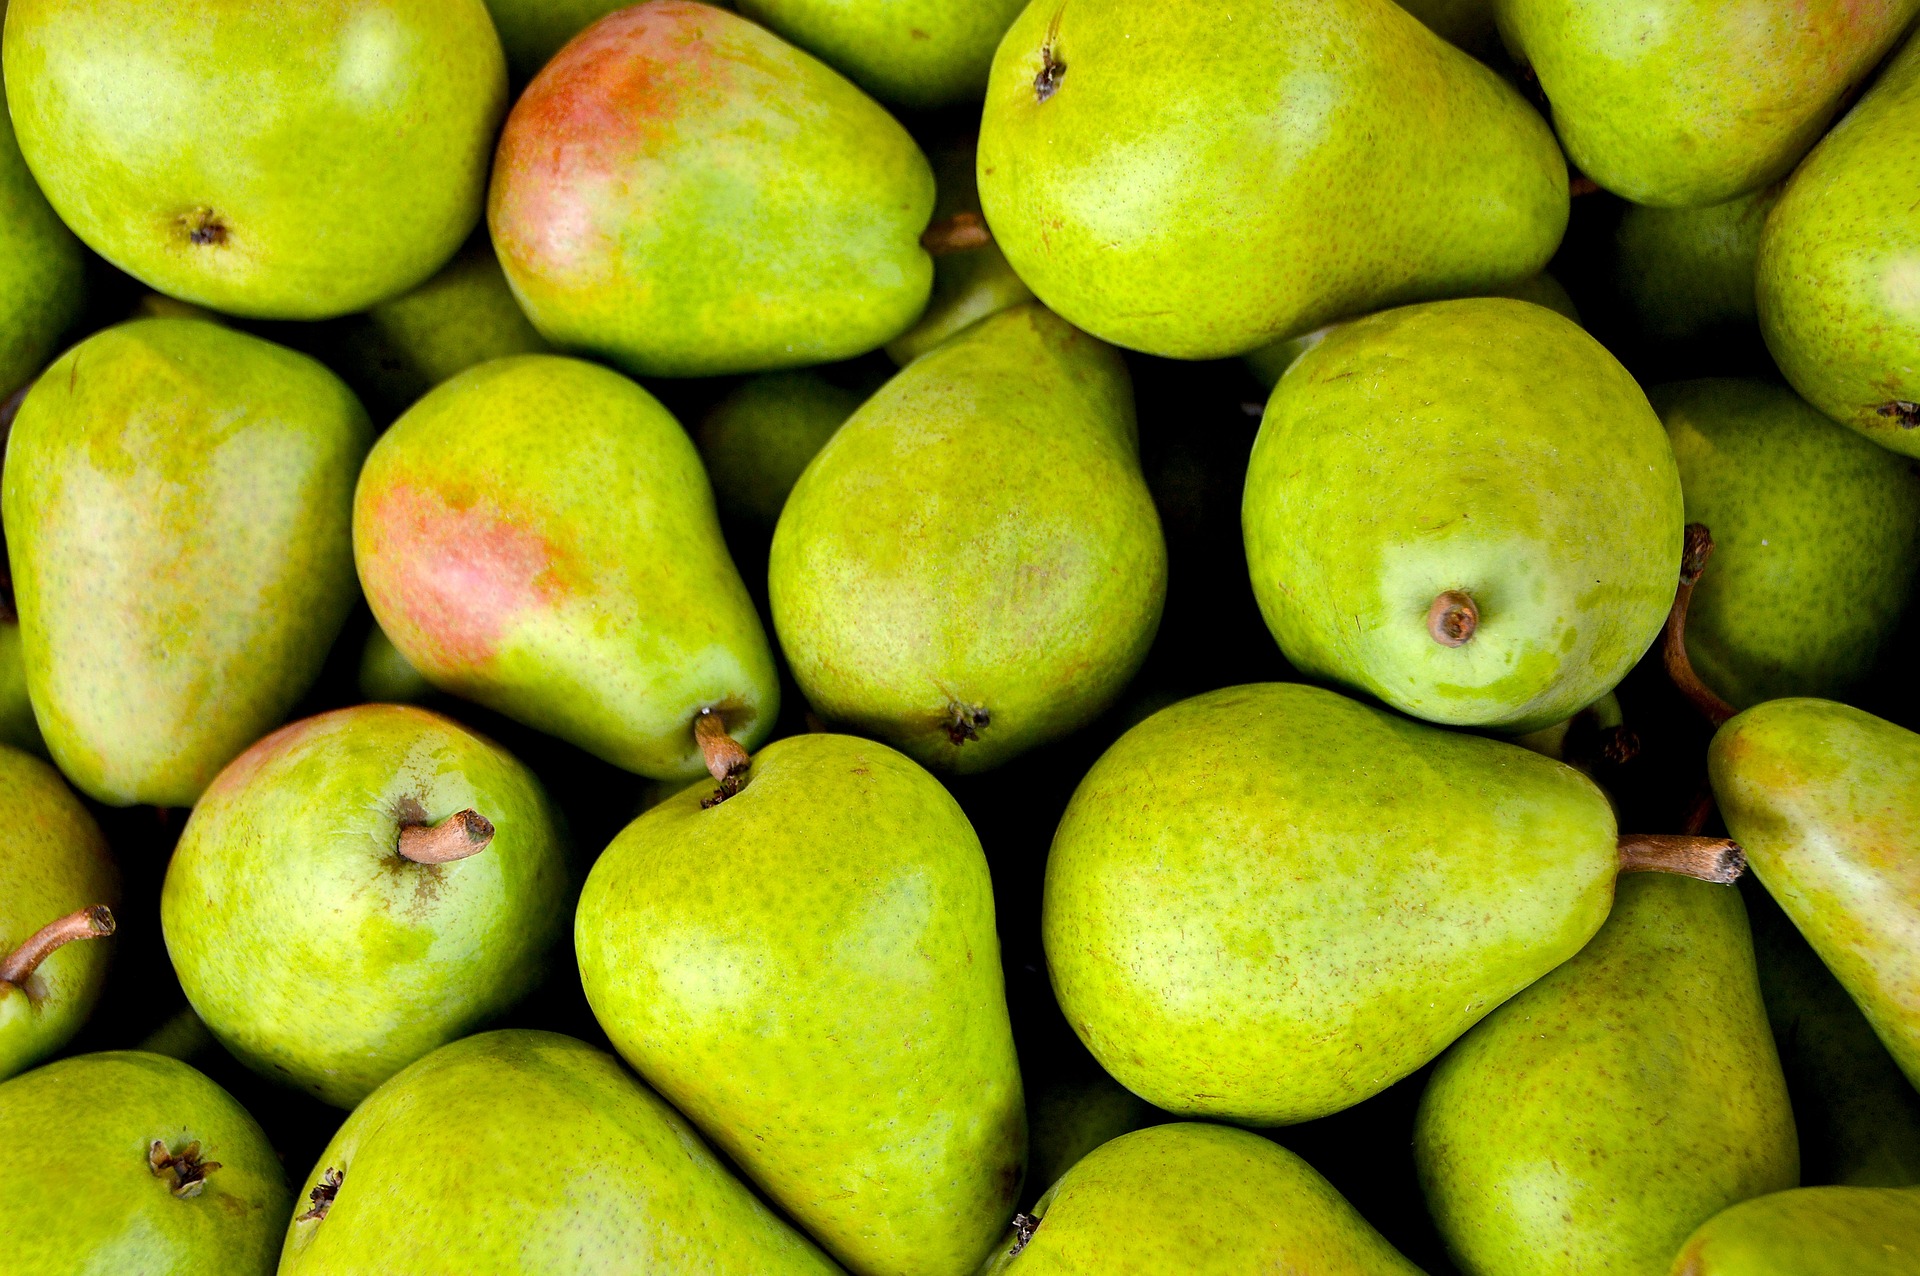 Lot of pears